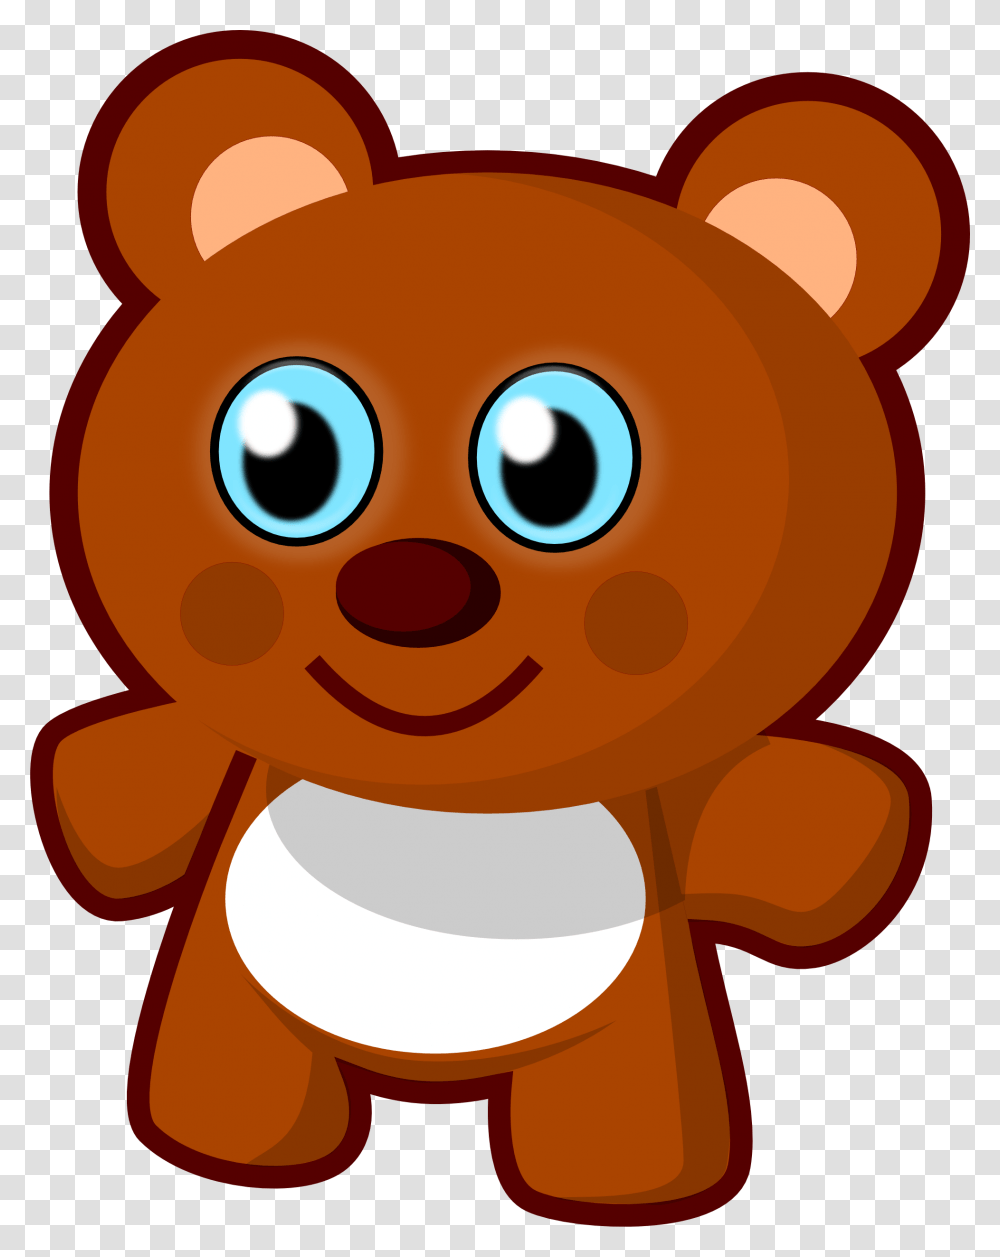 Teddy Bear Clip Group With Items, Sweets, Food, Confectionery, Plush Transparent Png